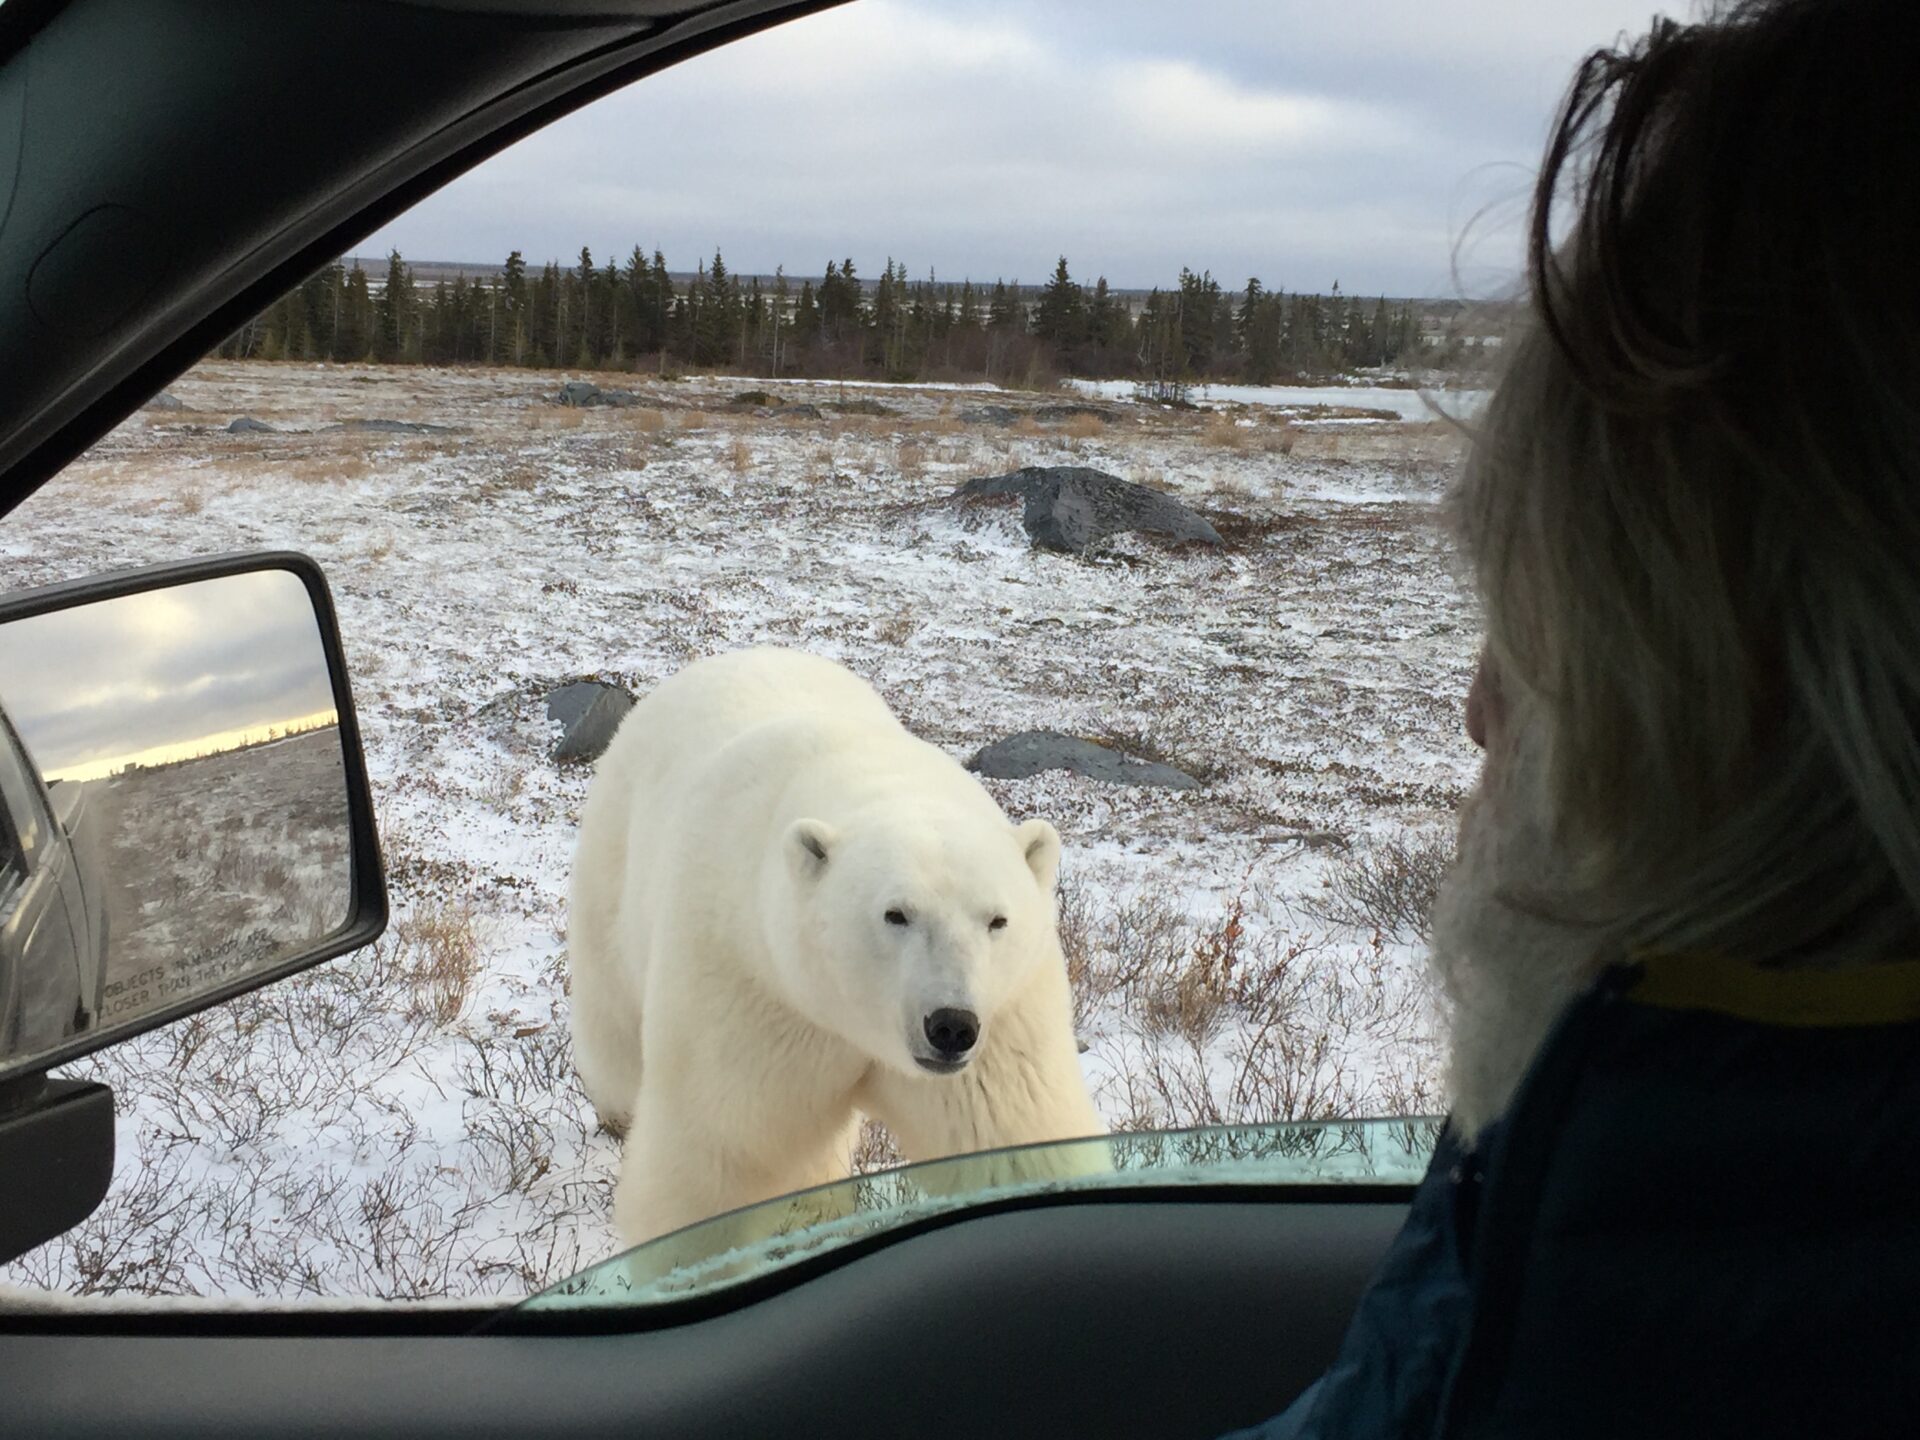 A polar bear standing beside a pickup truck in the tundra.